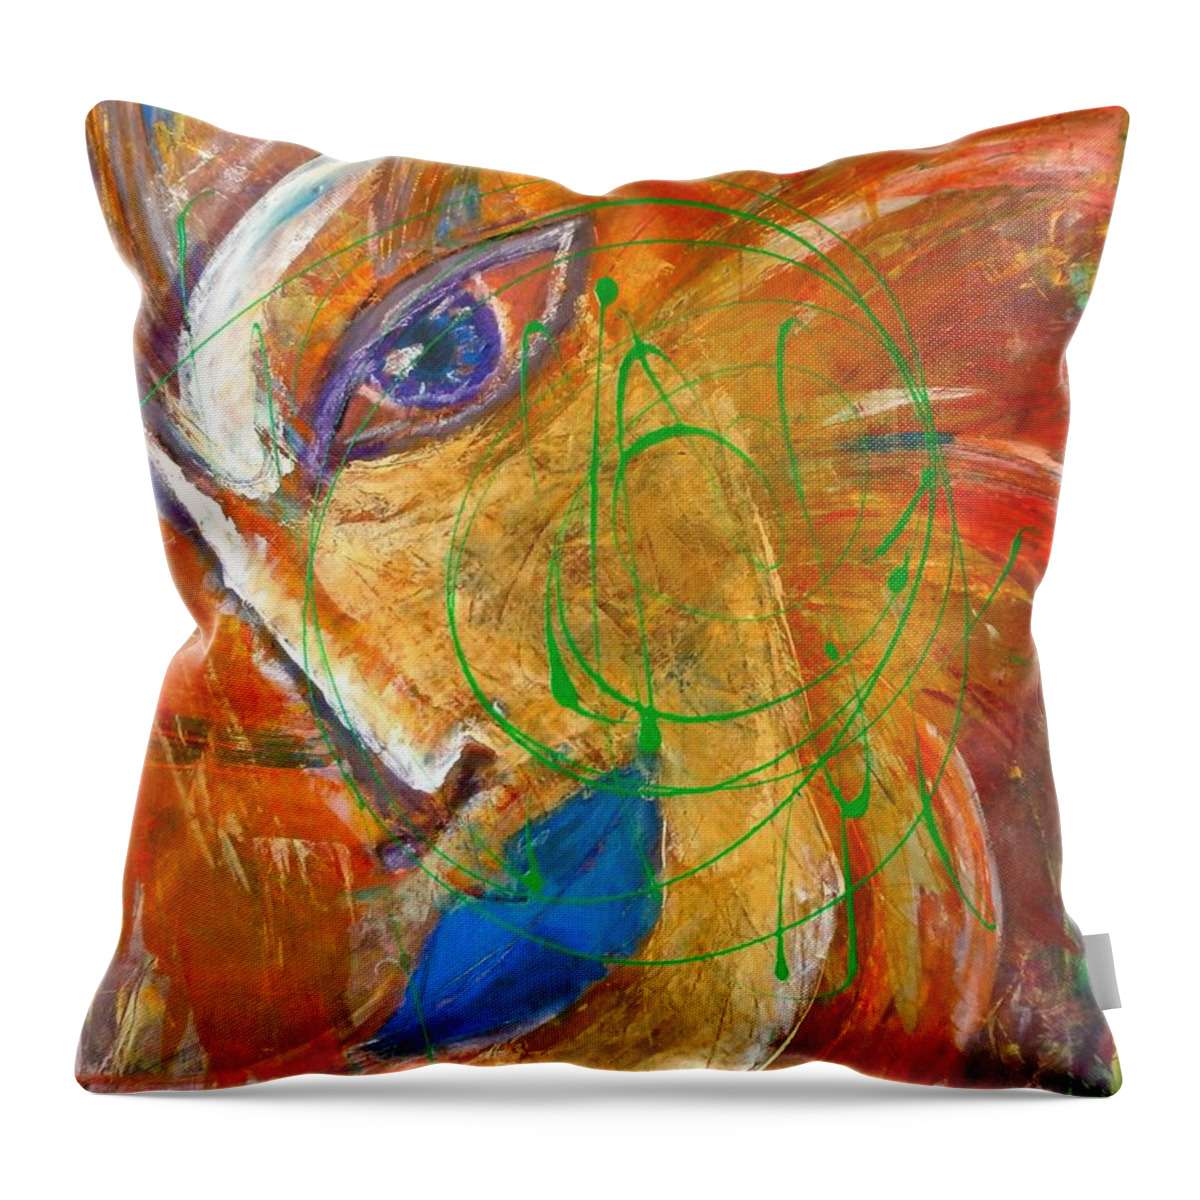 Portrait Throw Pillow featuring the painting Sumerian by Inessa Guterman